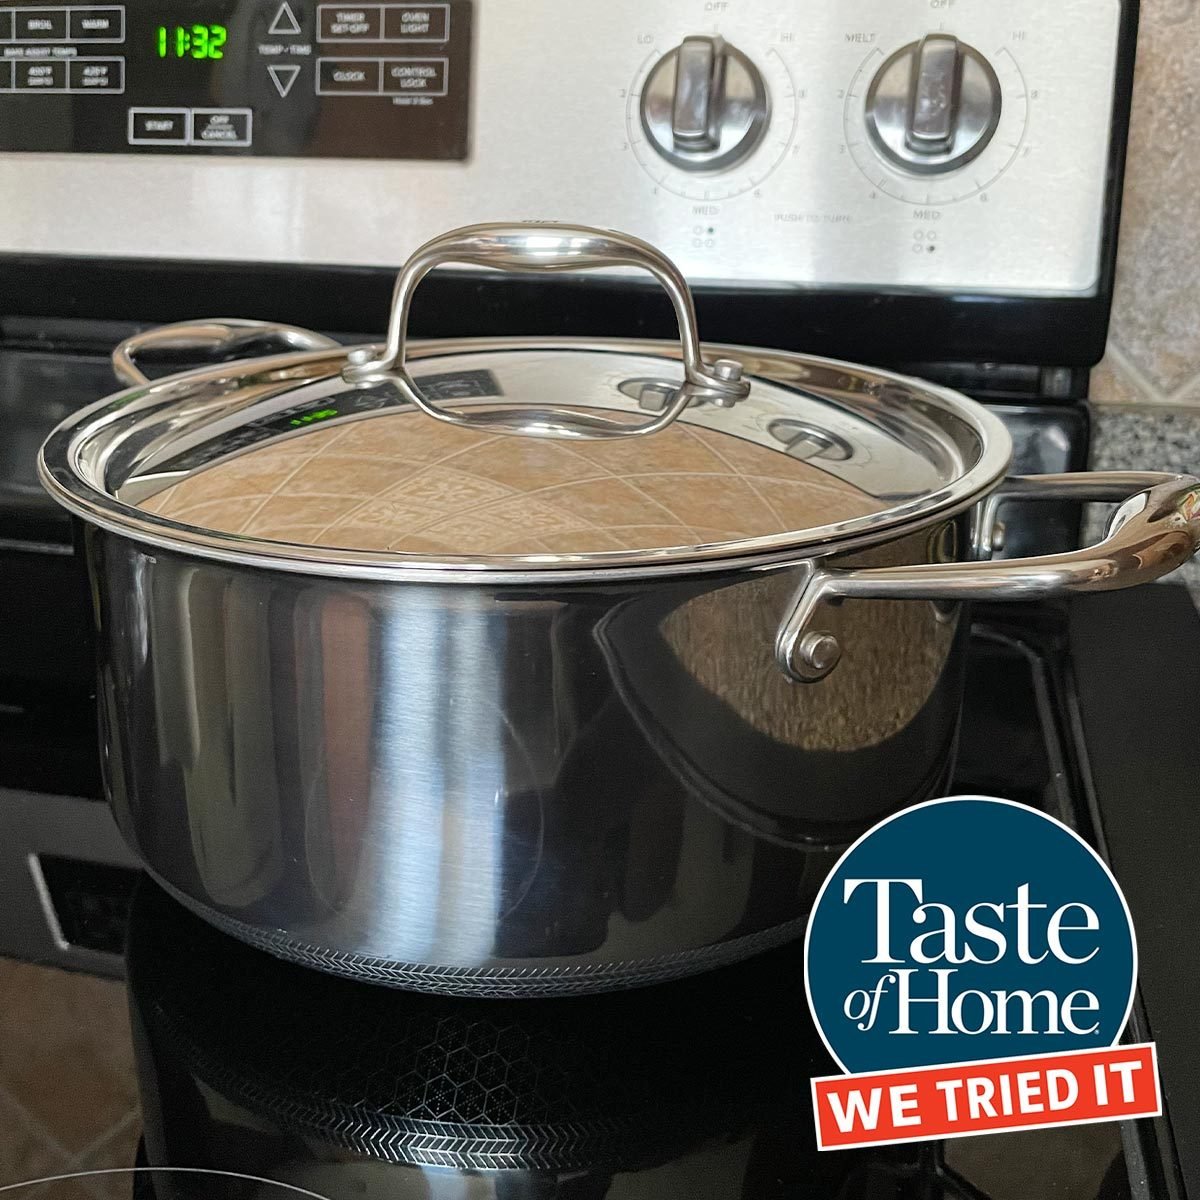 Why I've Added a Caraway Dutch Oven to My Kitchen Cooking Tools